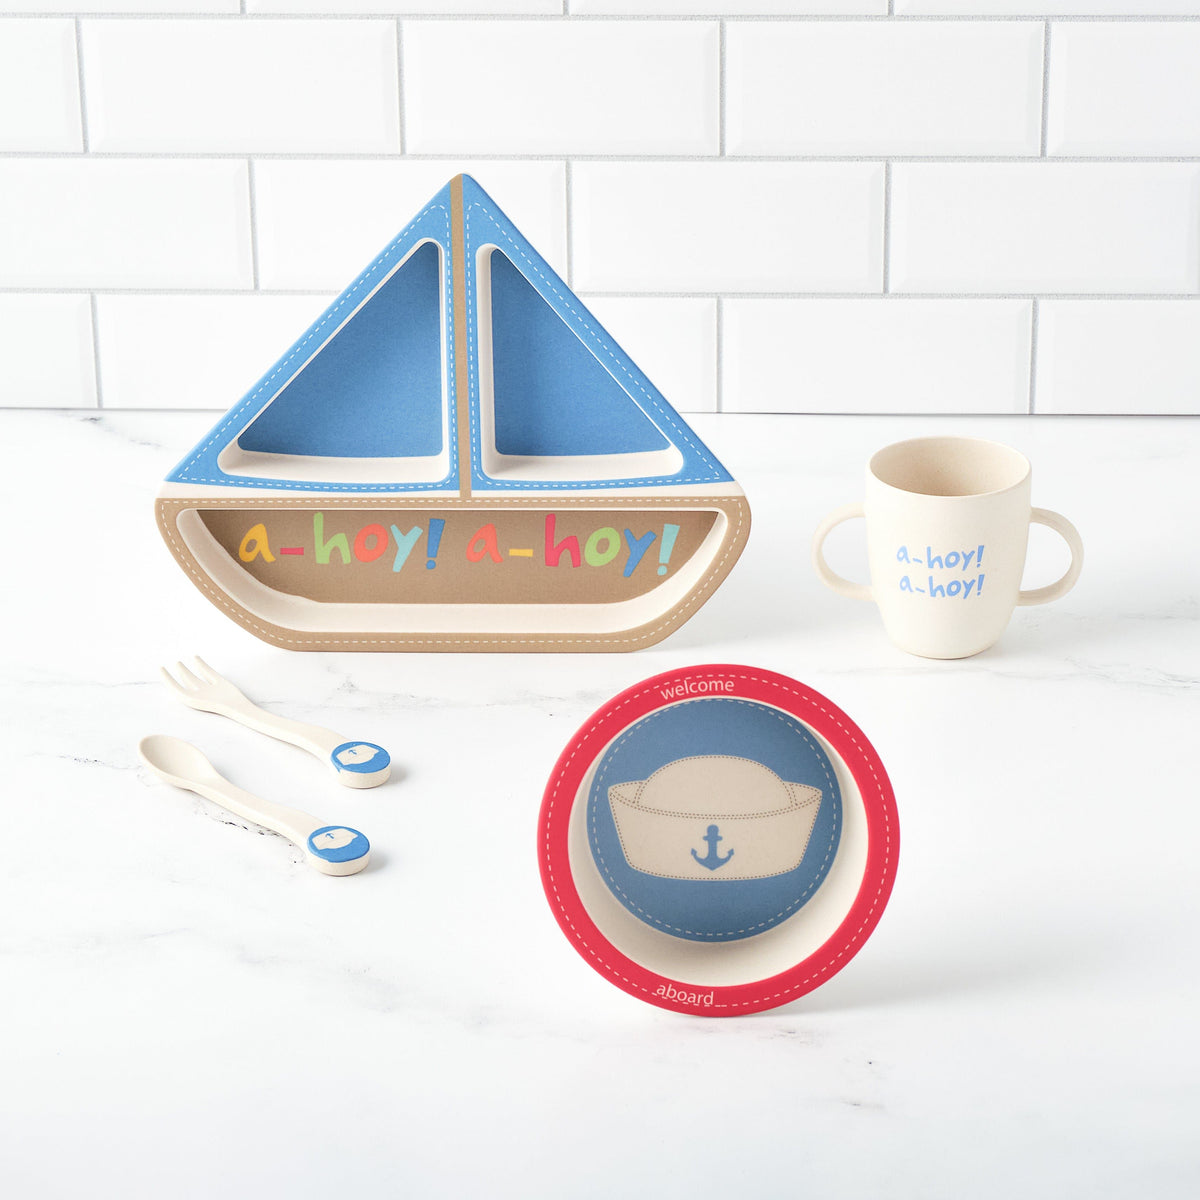 Bamboozle Home Sailboat Shaped Dinner Set by Bamboozle Home